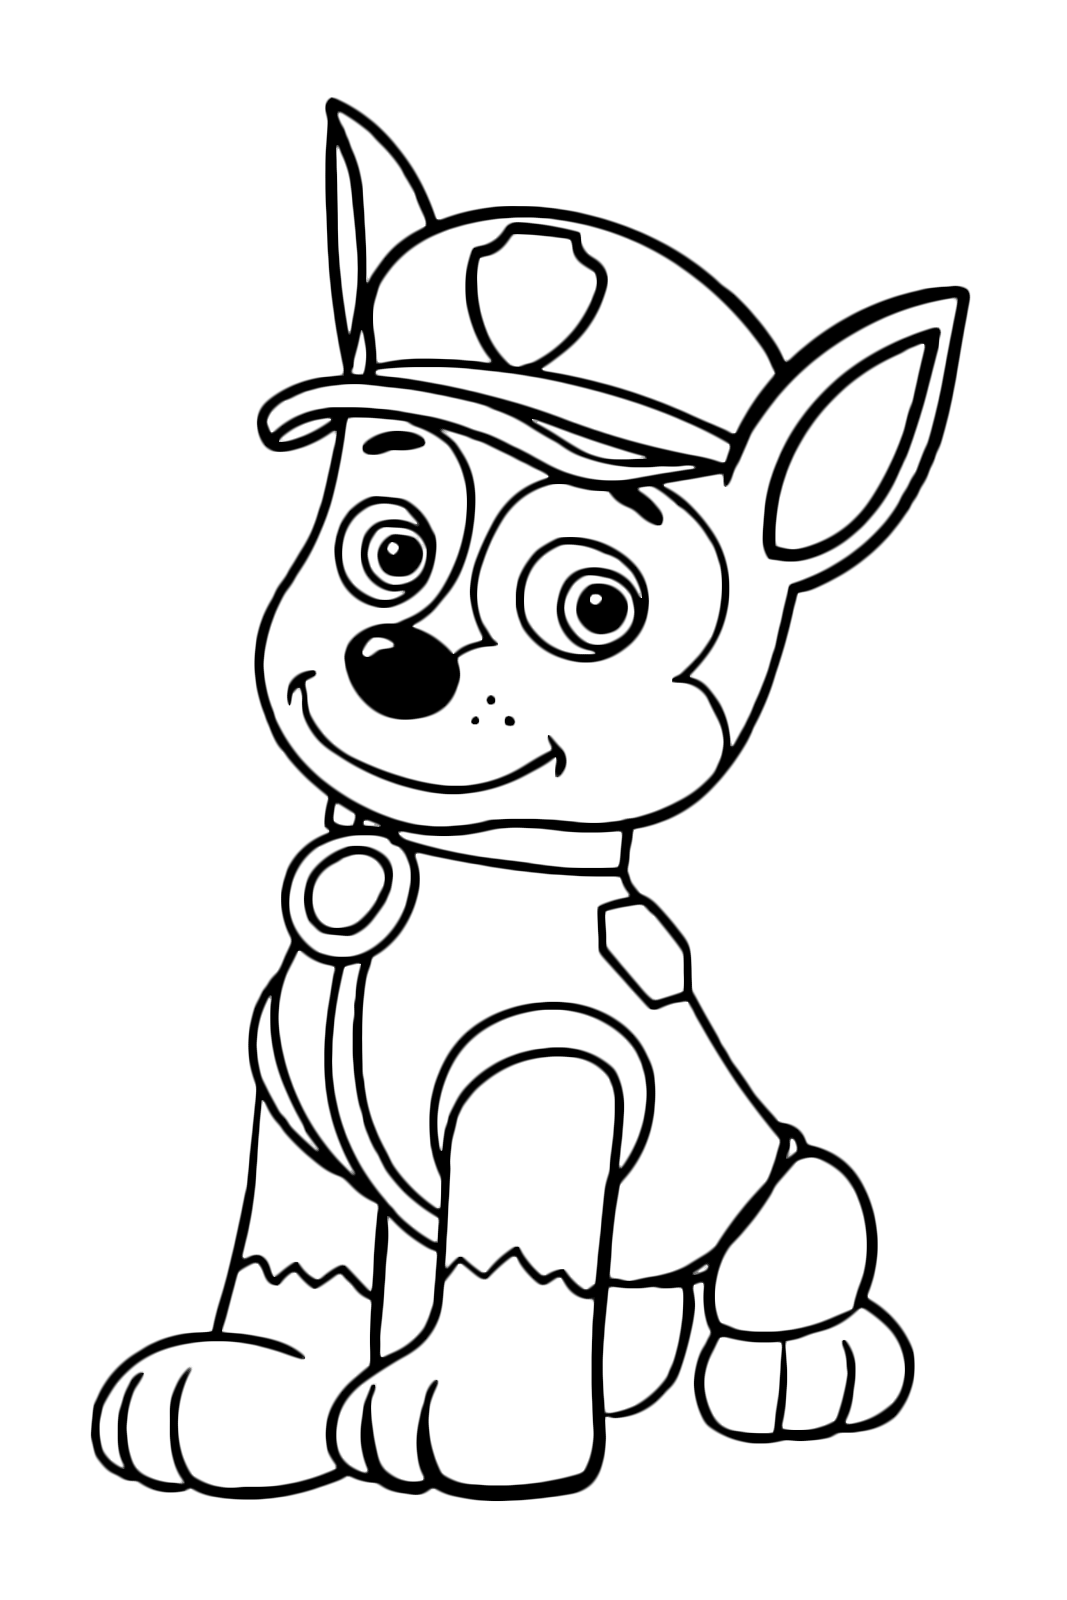 PAW Patrol - Chase the dog is sitting